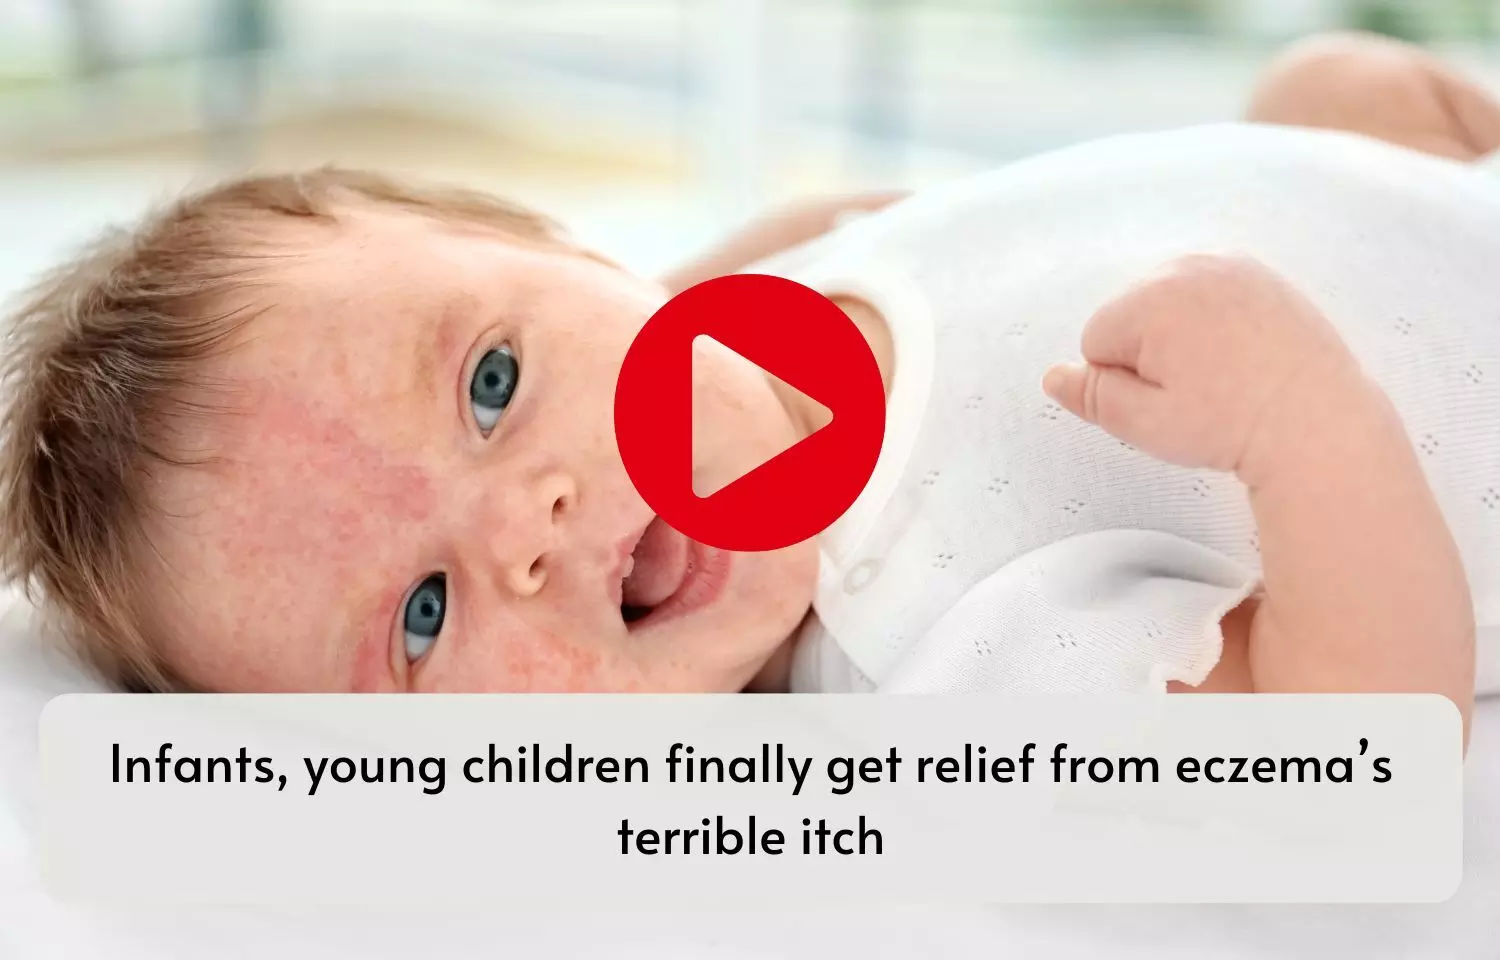 Infants, young children finally get relief from eczemas terrible itch